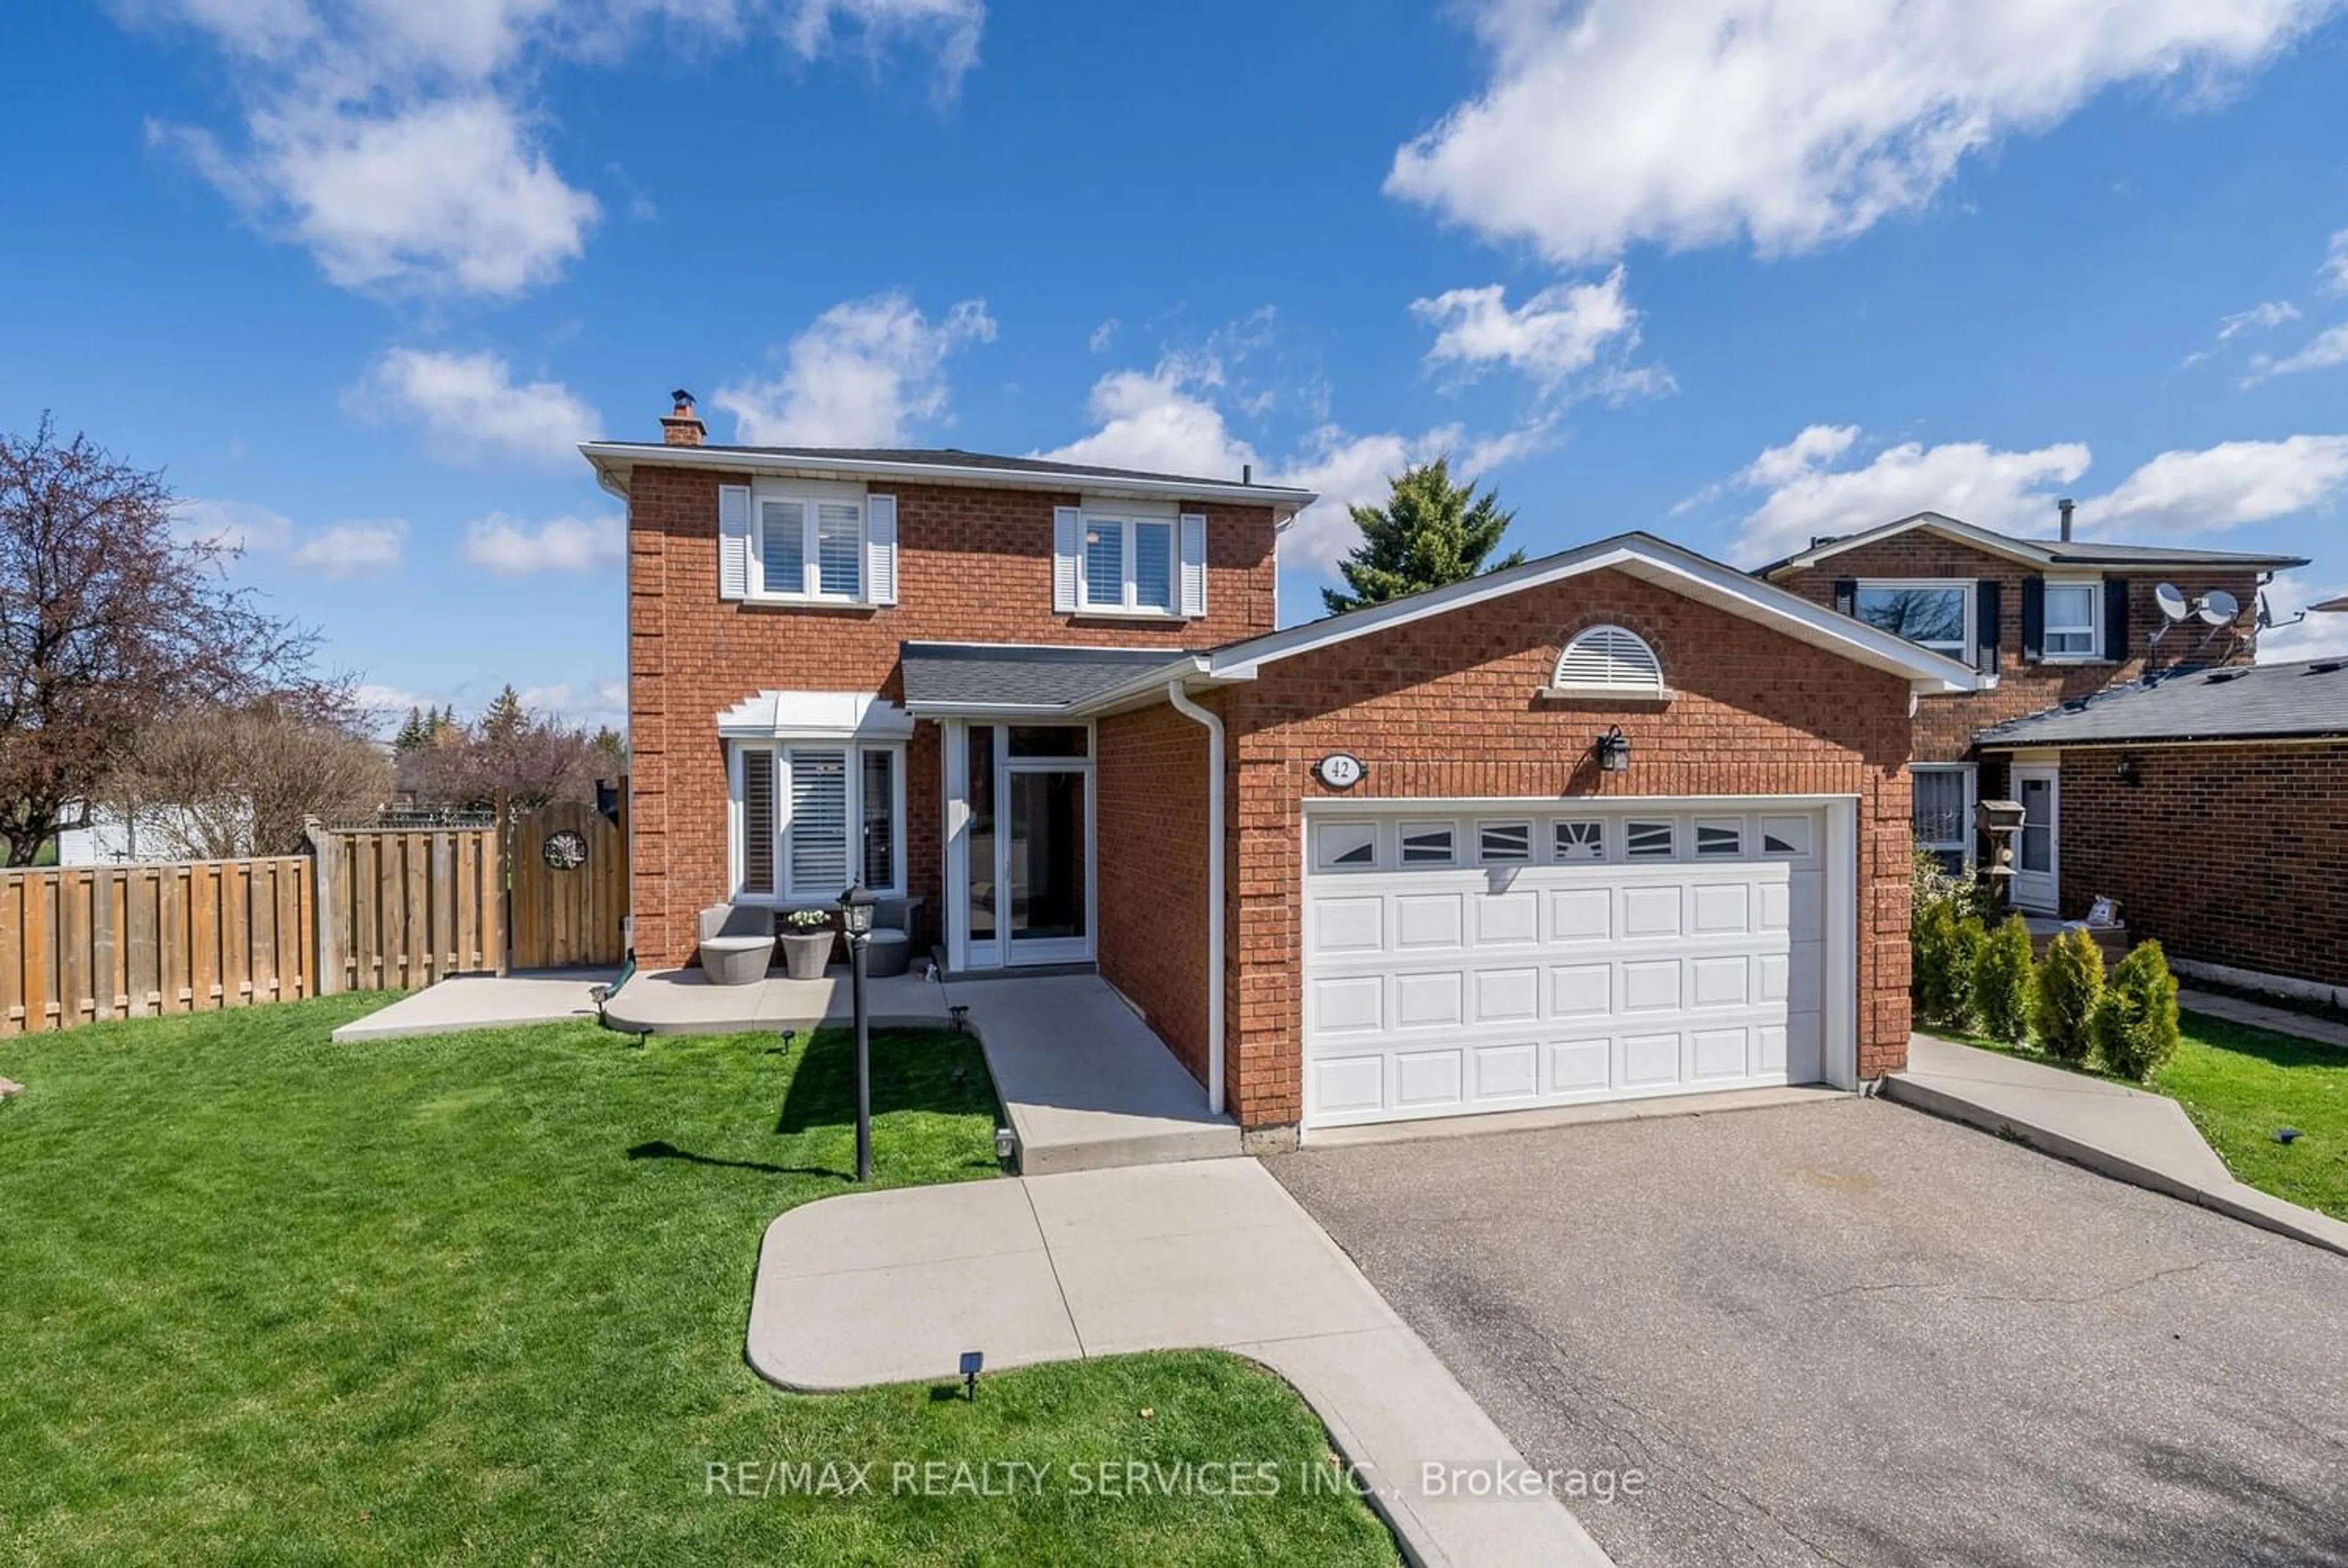 Home with brick exterior material for 42 Willowcrest Crt, Brampton Ontario L6X 3K7